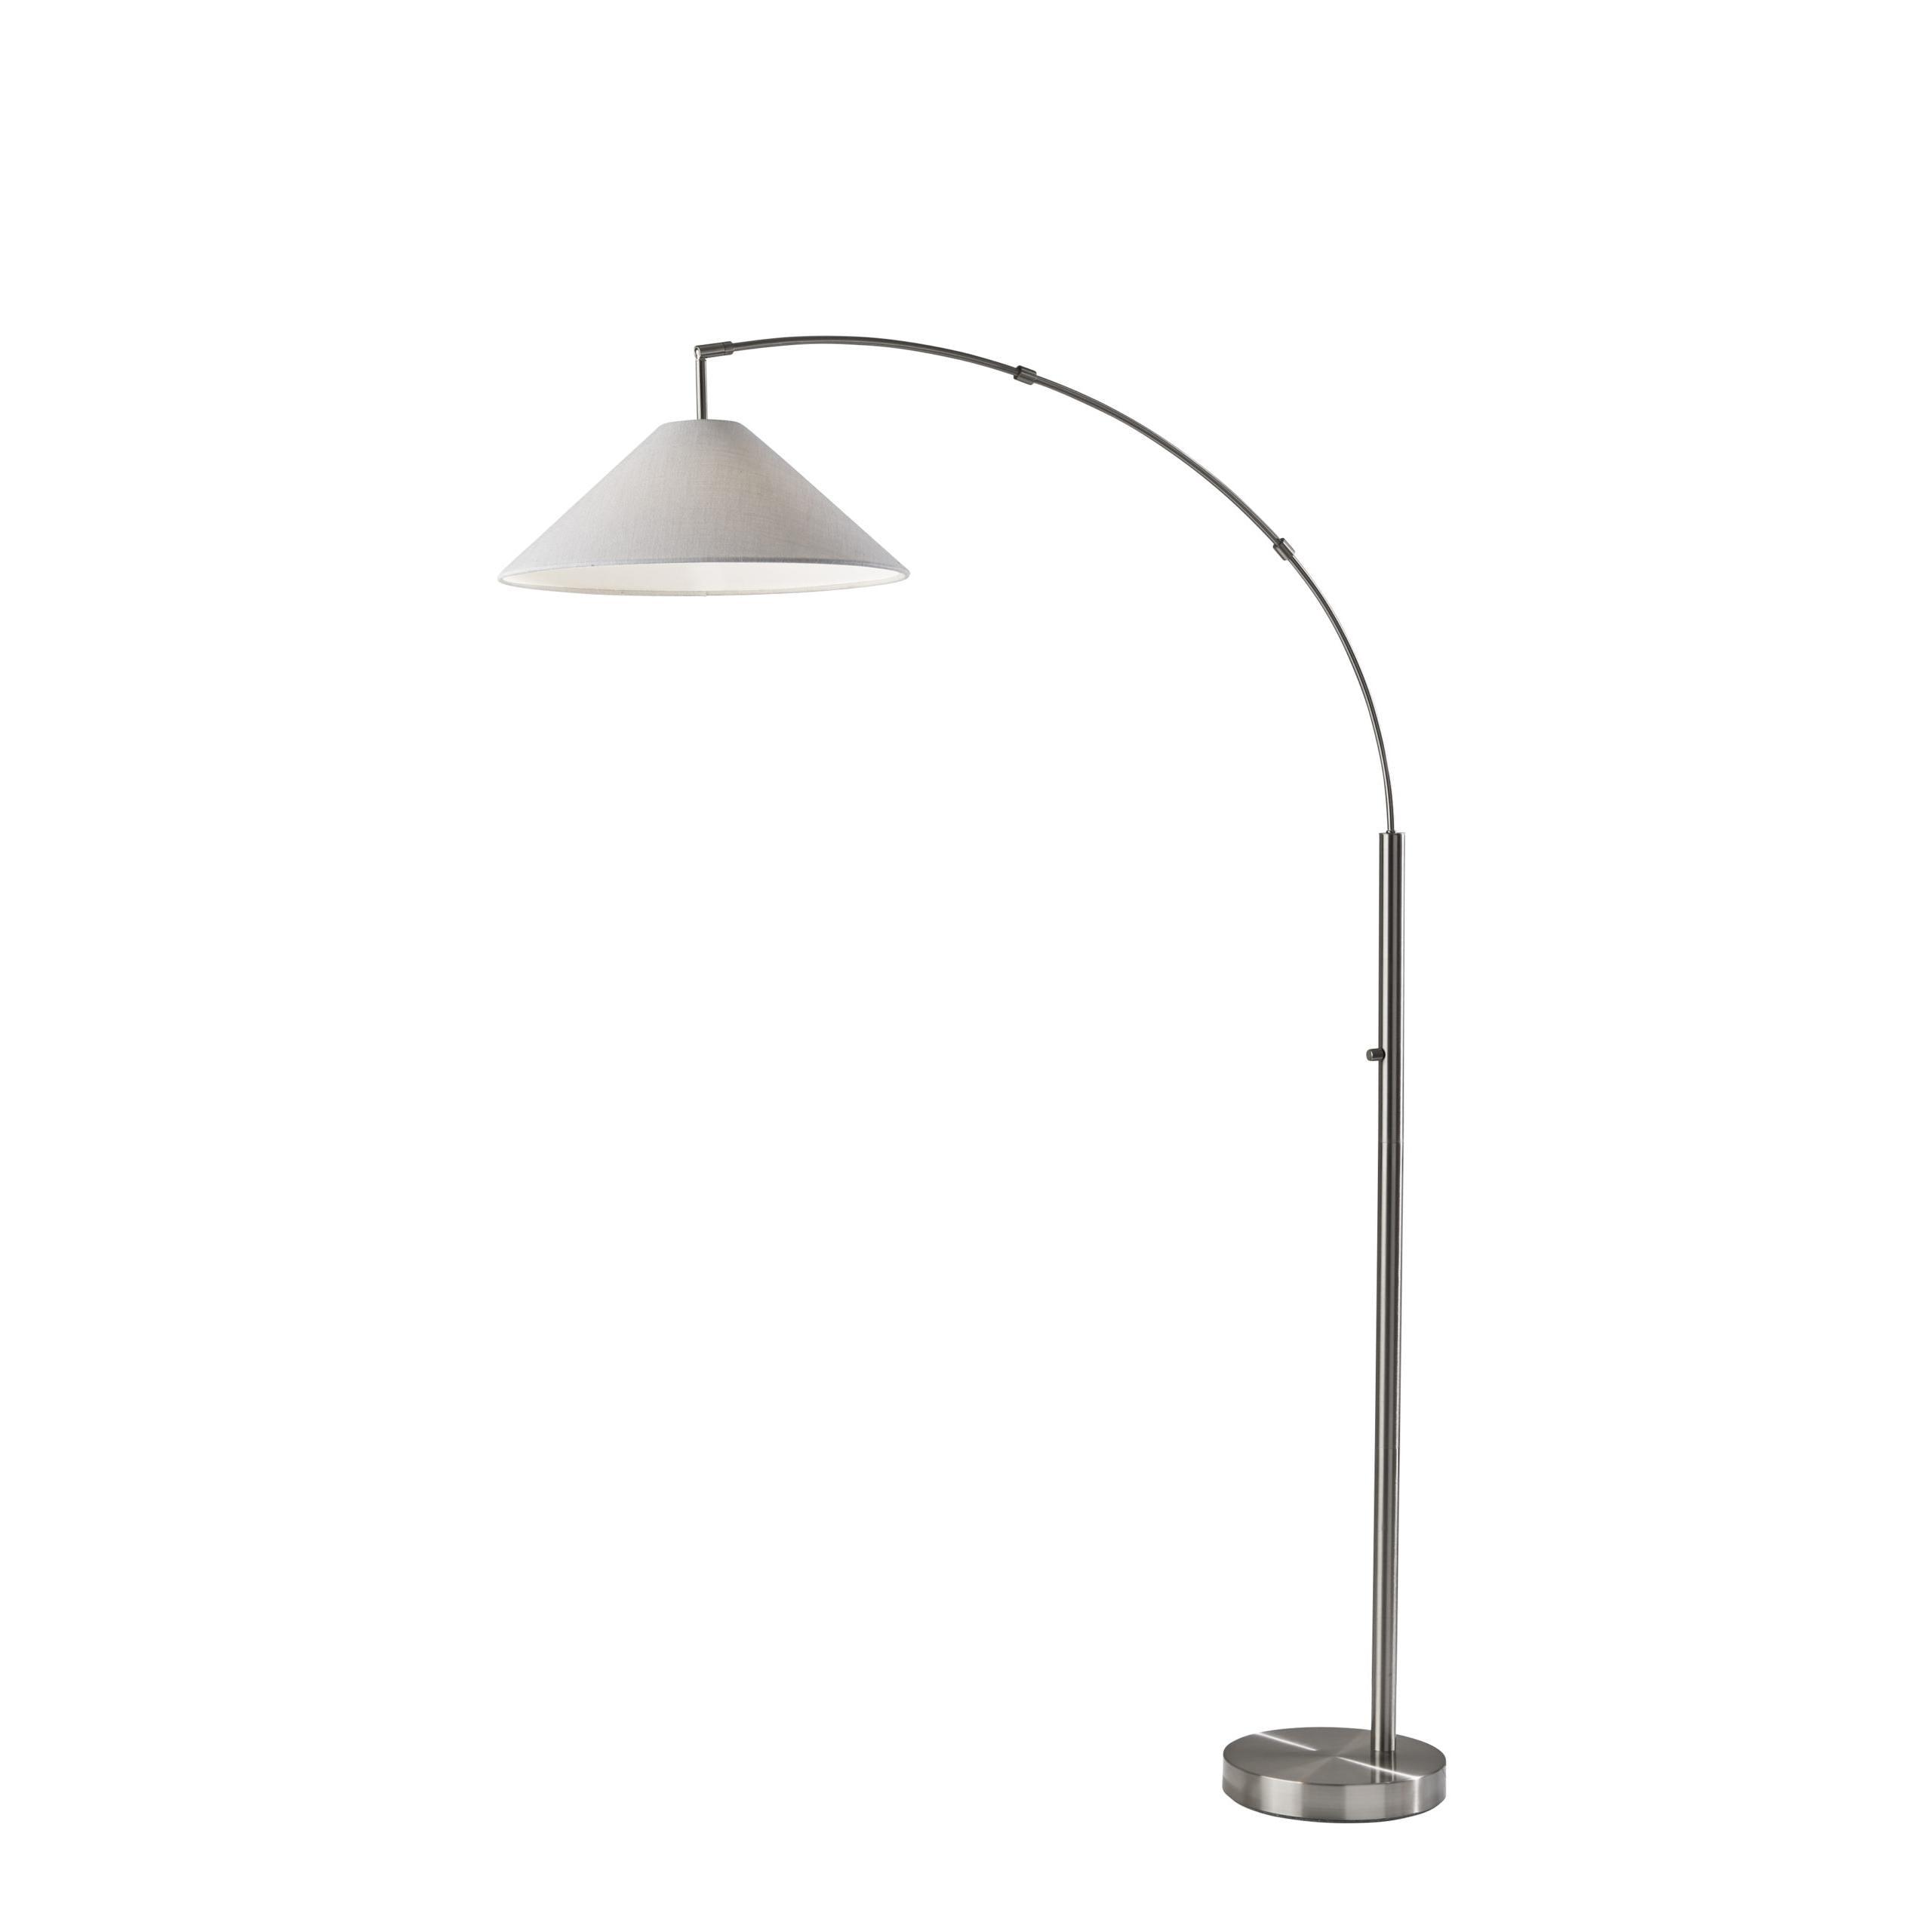 Sleek Brushed Steel Arc Floor Lamp with Textured White Shade